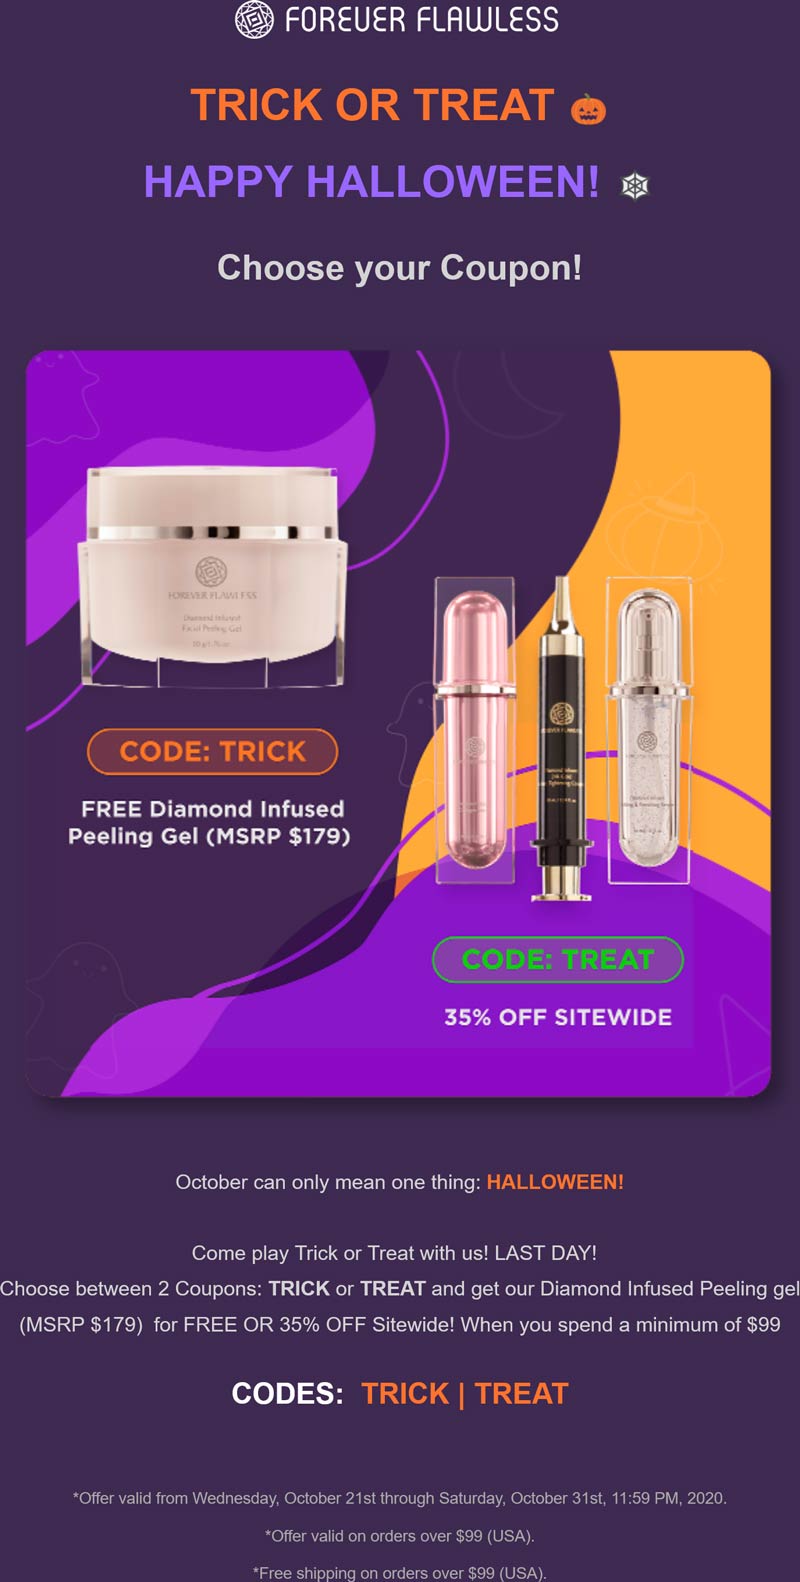 Forever Flawless stores Coupon  Free peeling gel or 35% off everything at Forever Flawless cosmetics via promo code TRICK or TREAT #foreverflawless 